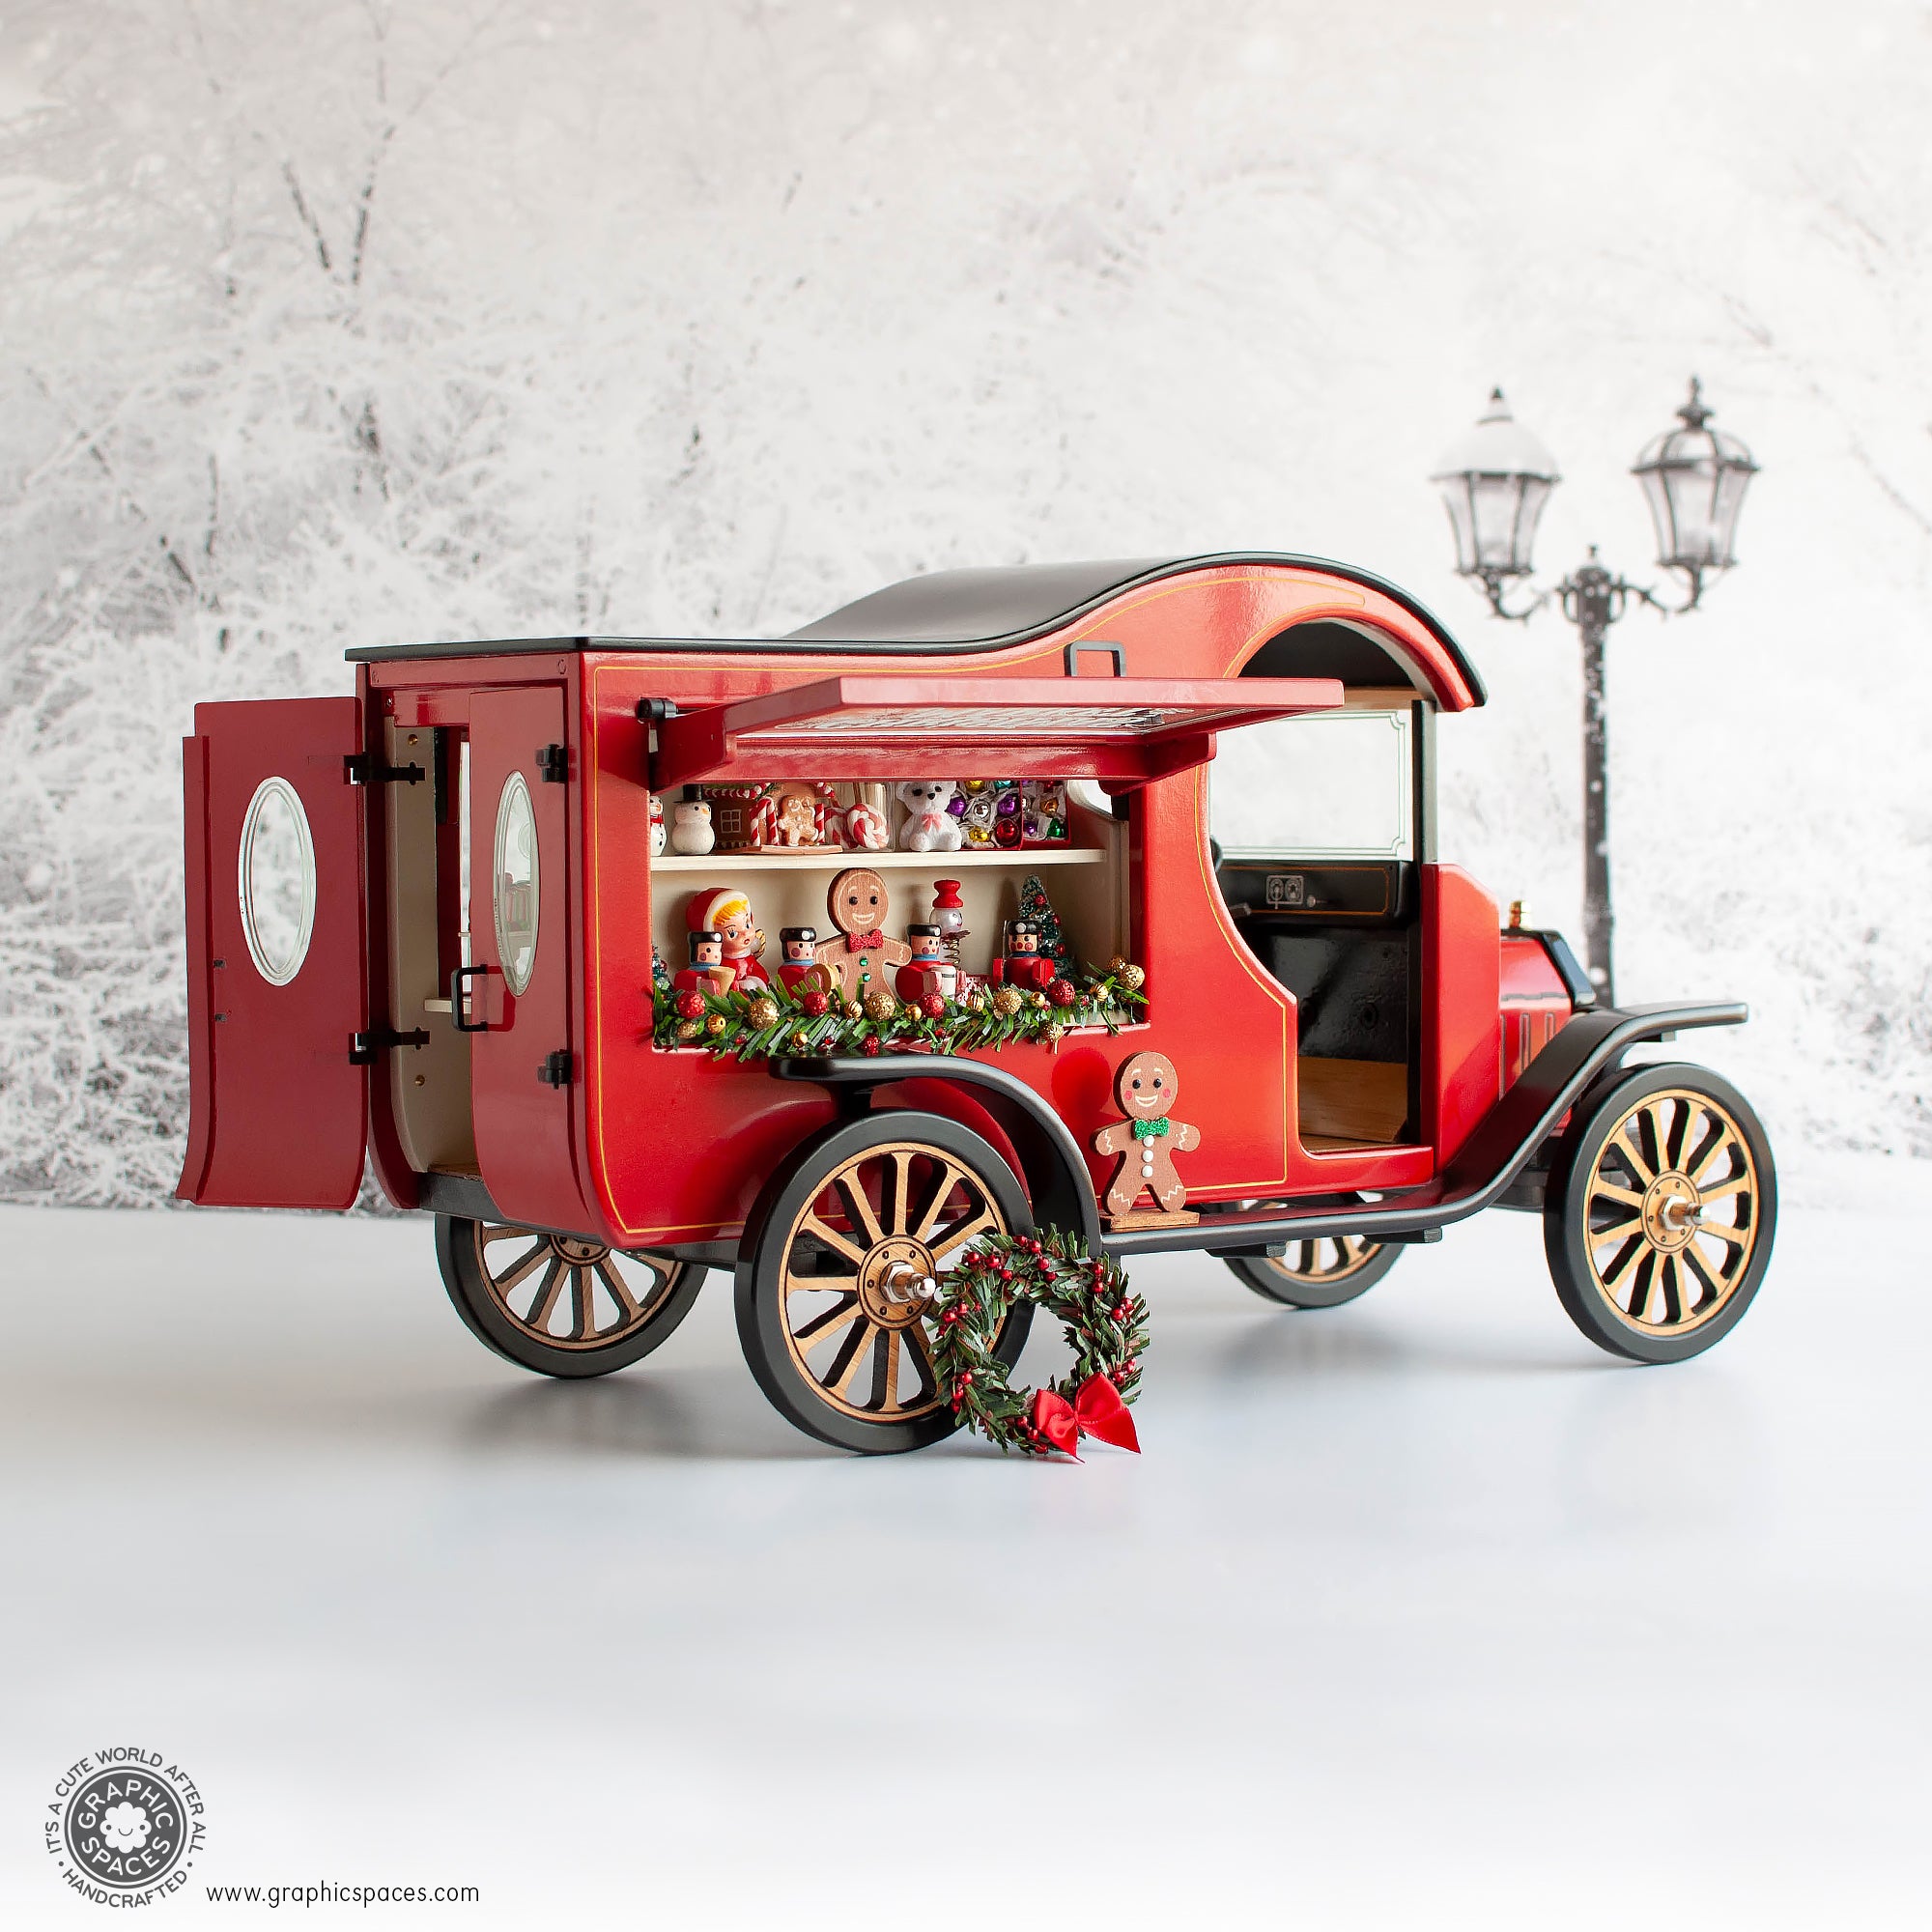 1:12 Scale Room Box Red Christmas Market Truck Model T C Cab. Passenger full side view. Closed display window.